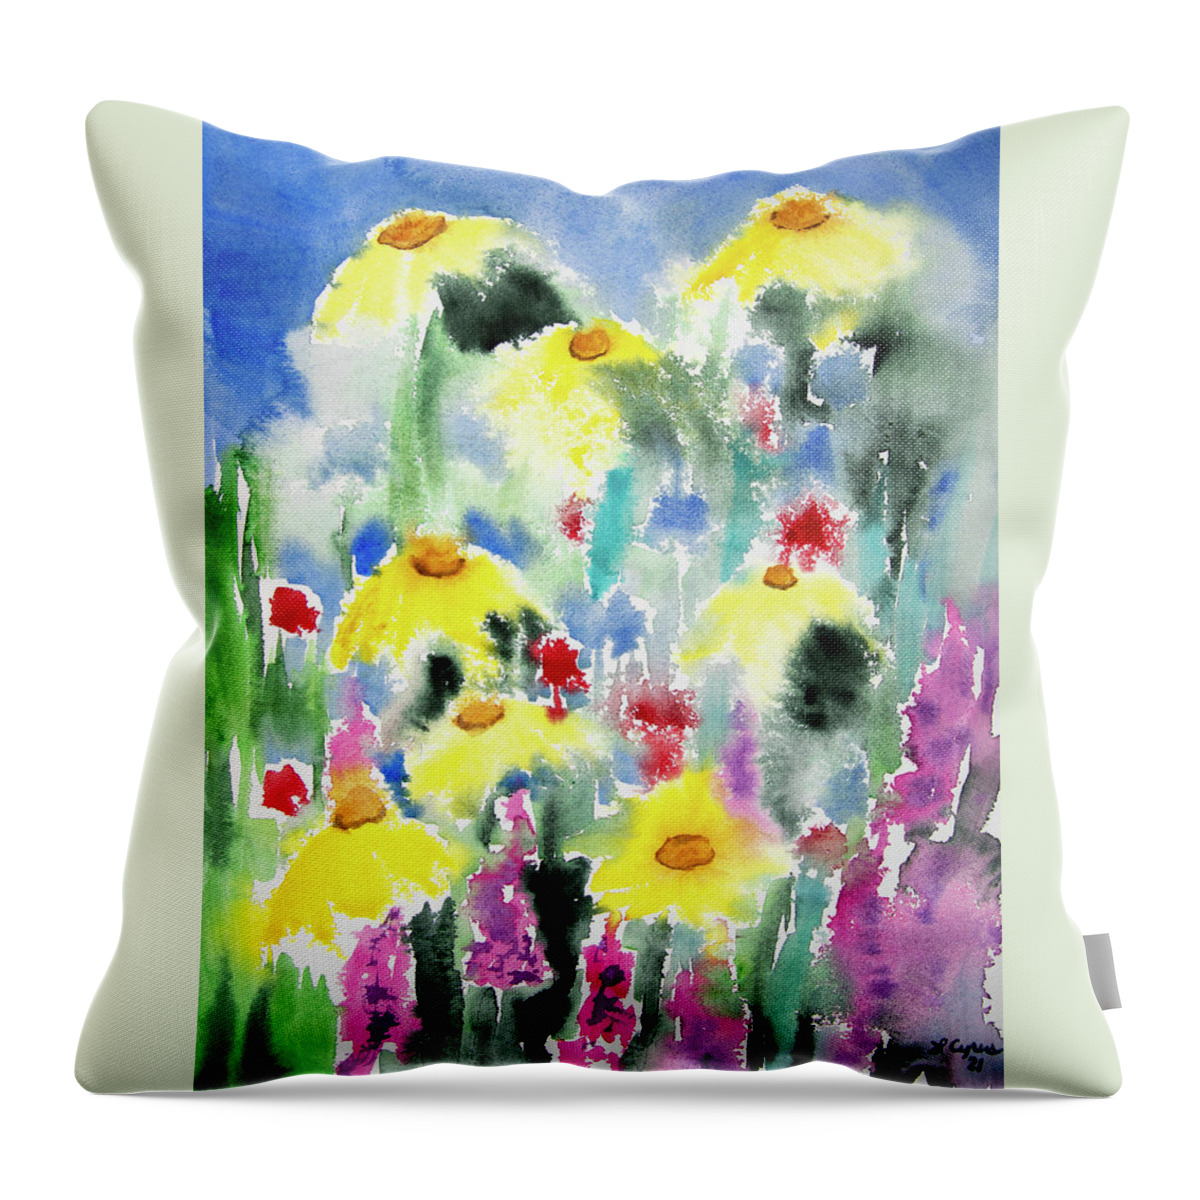 Summer Throw Pillow featuring the painting Watercolor - Colorful Summer Garden by Cascade Colors